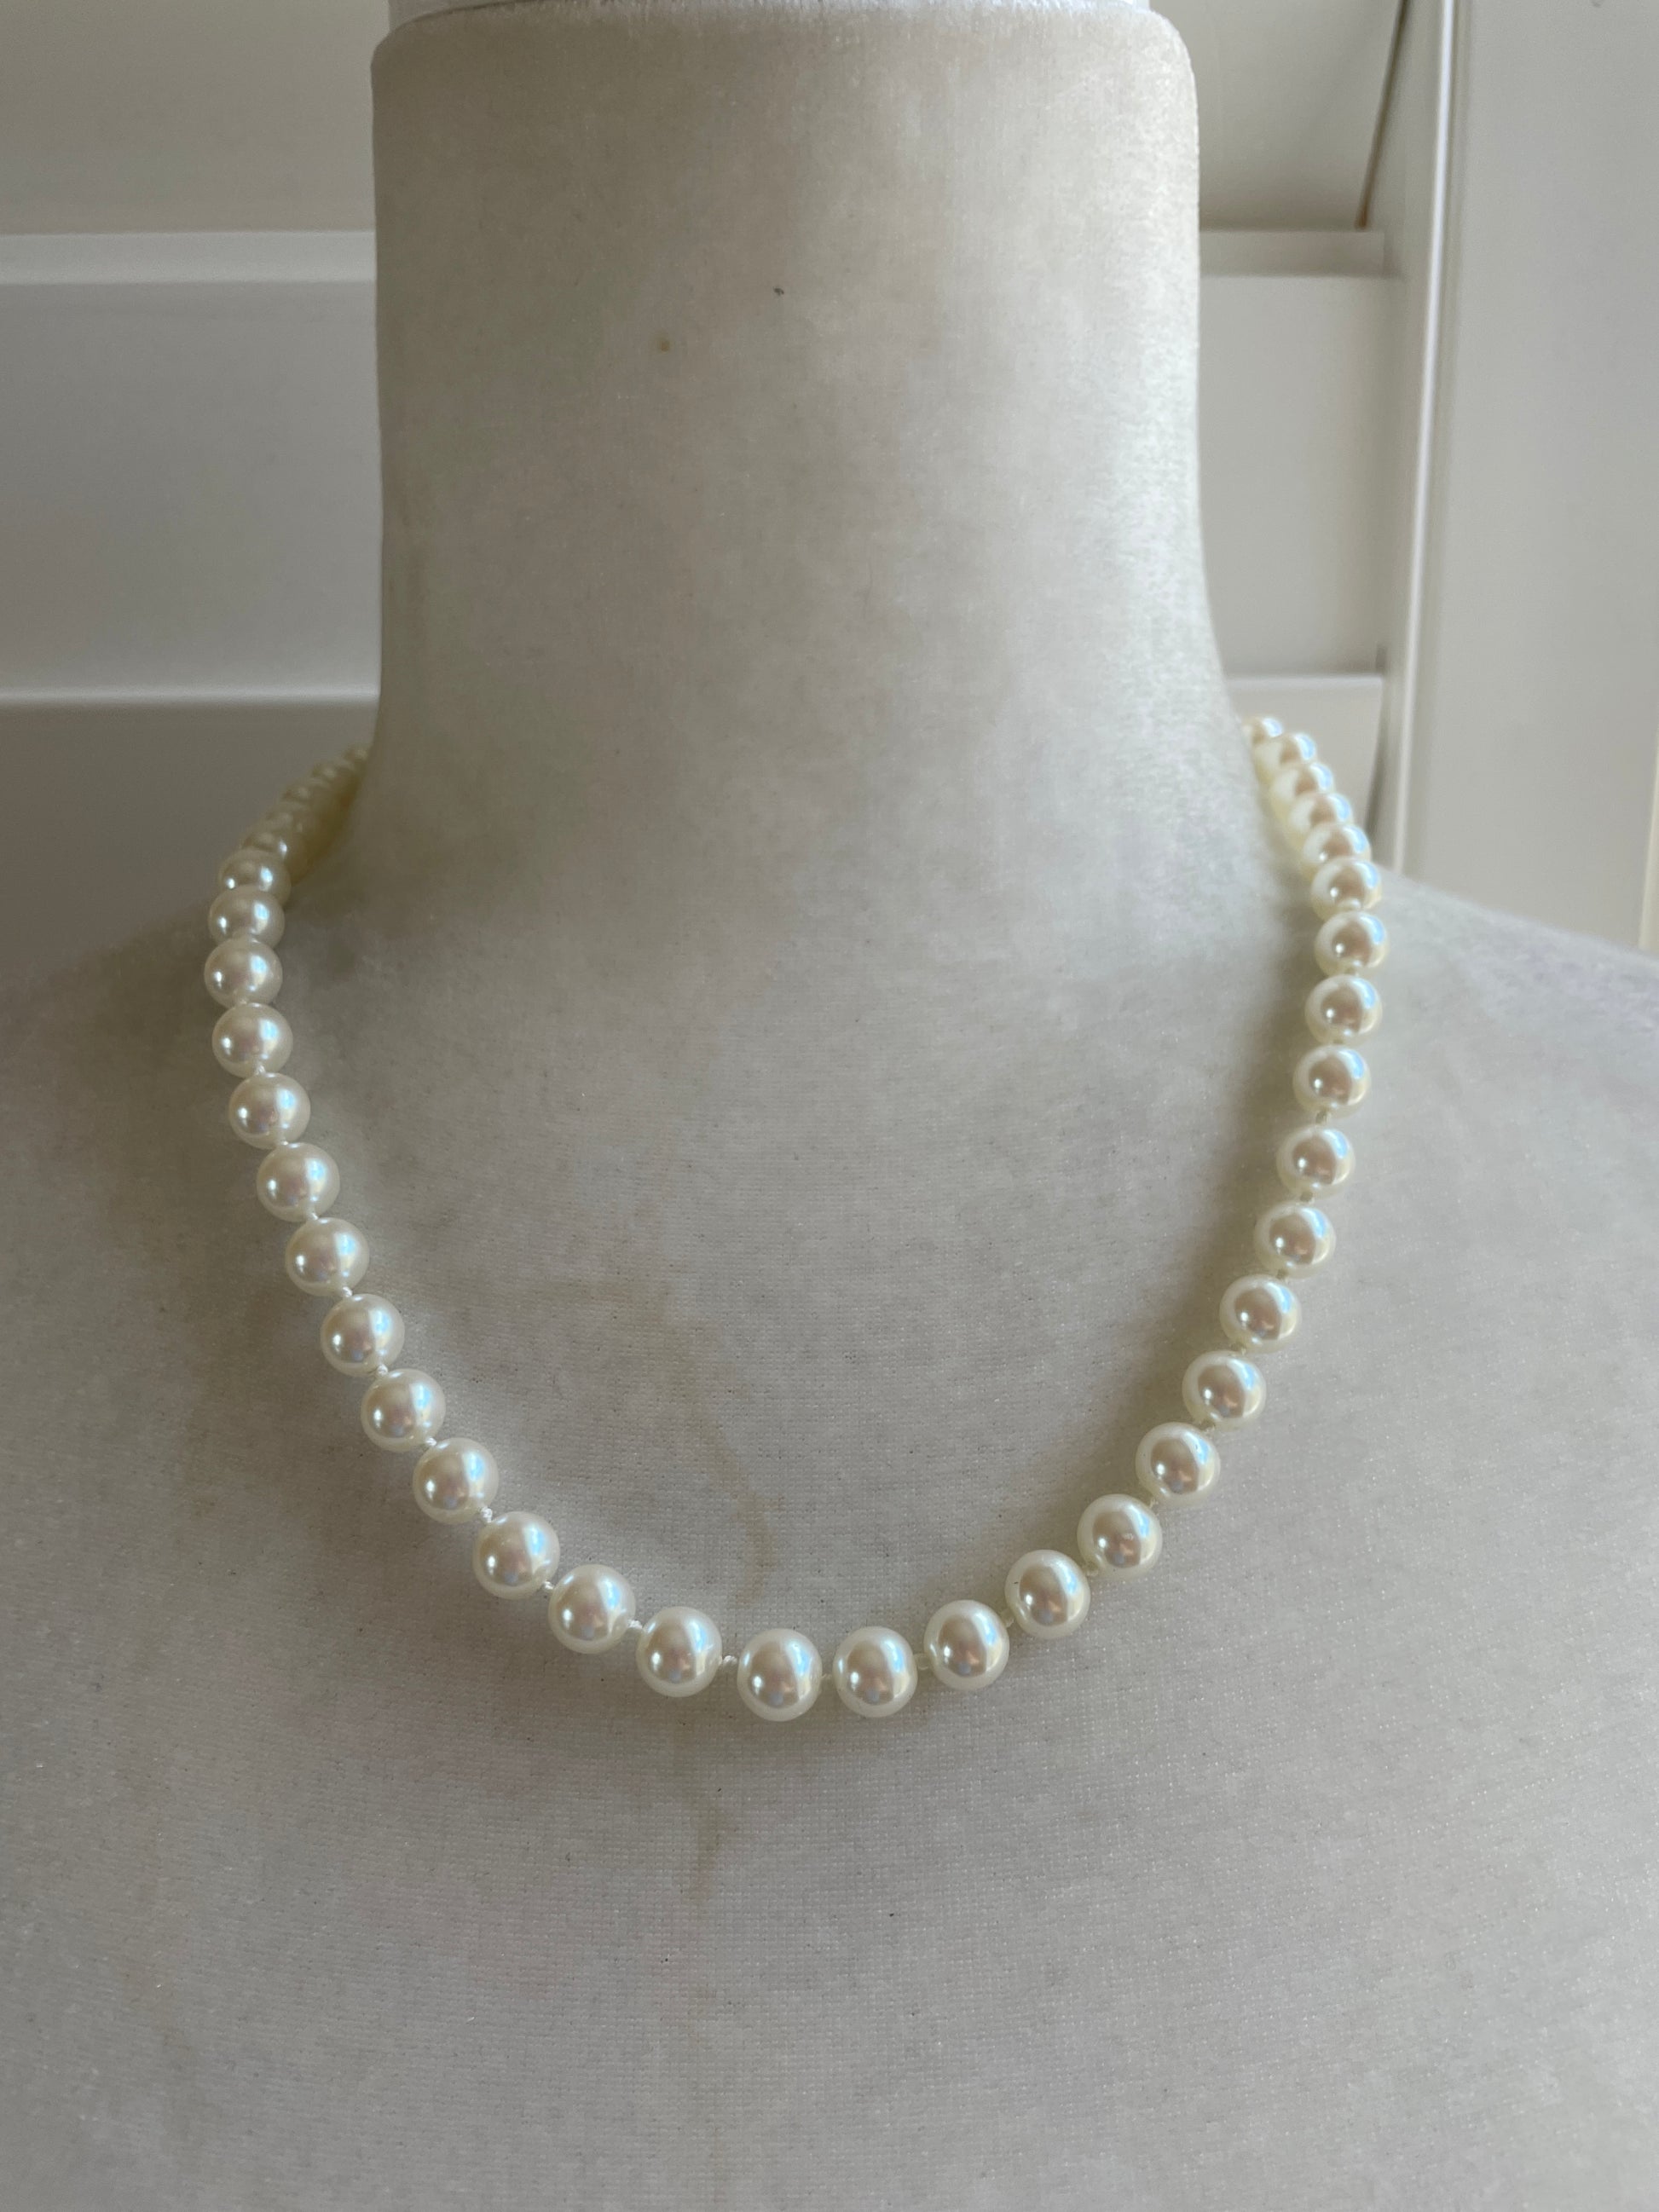  80s Signed Napier Glass Faux Pearl Classic Necklace